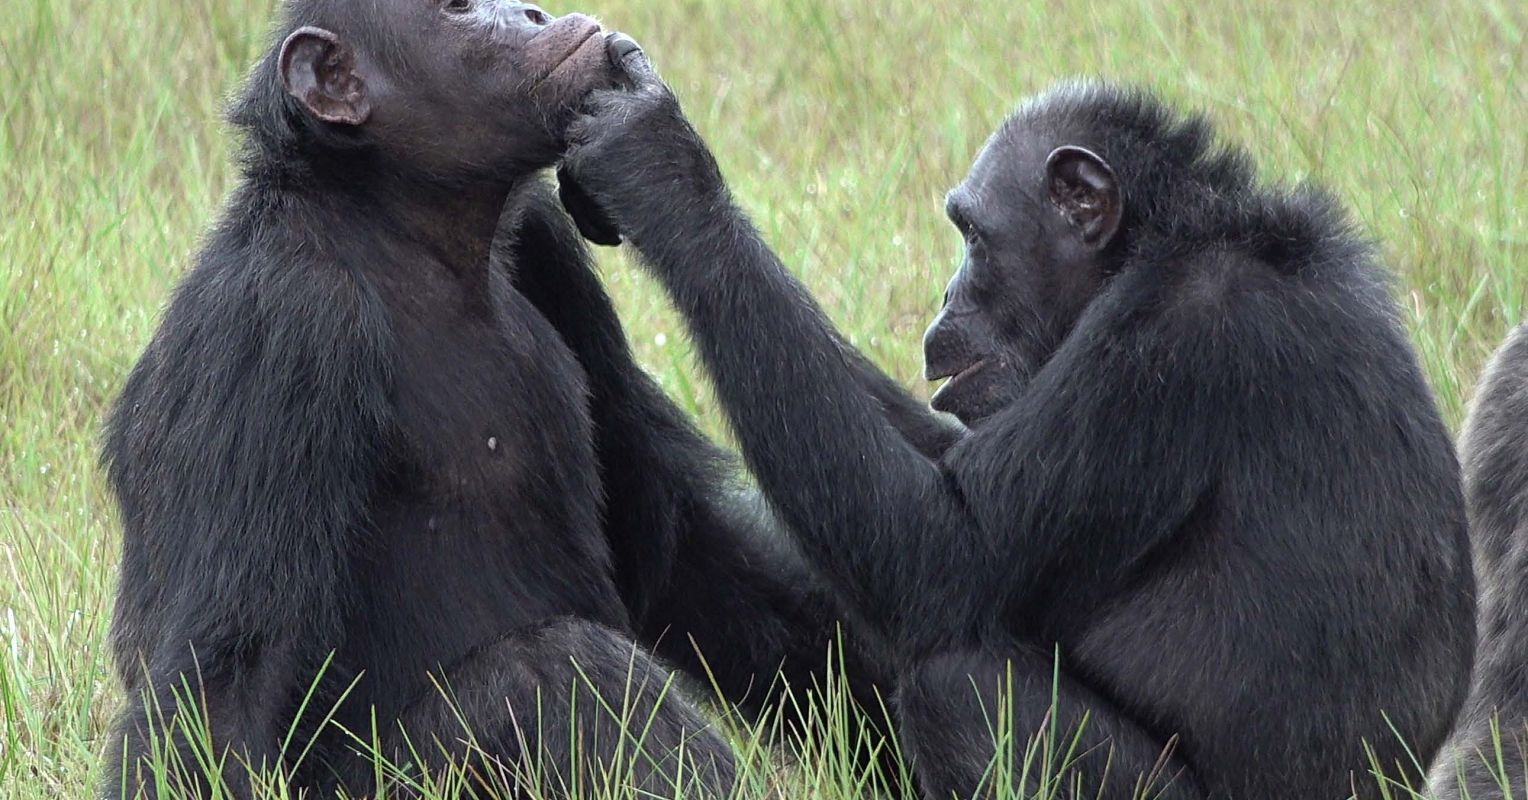 Chimpanzees Observed Applying Insects to Injuries